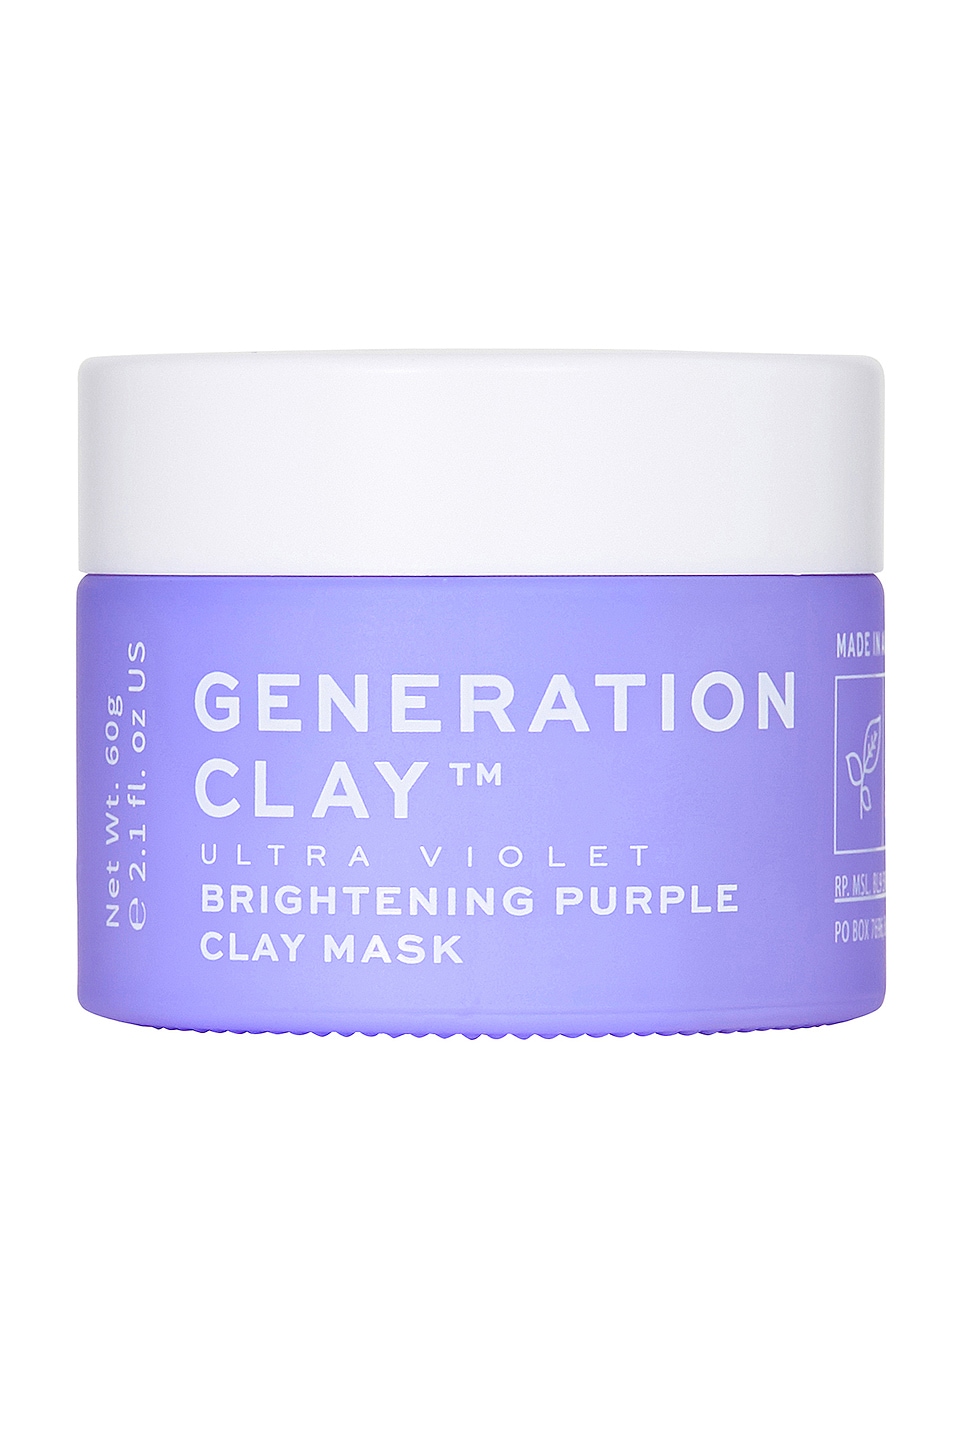 GENERATION CLAY GENERATION CLAY ULTRA VIOLET BRIGHTENING PURPLE CLAY MASK IN BEAUTY: NA.,GENC-WU2